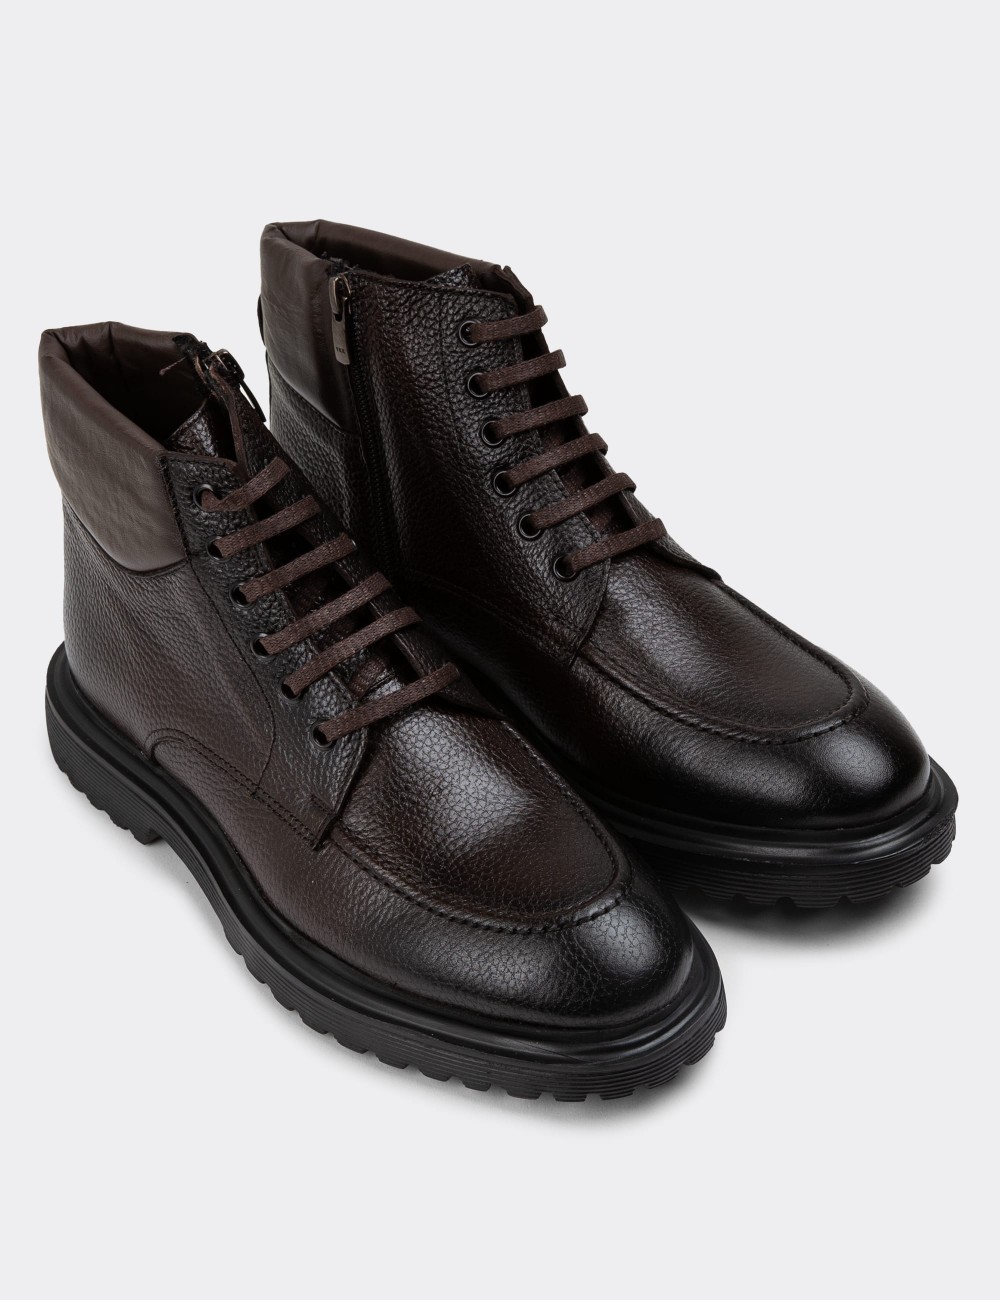 Brown Leather Boots - 01929MKHVE02